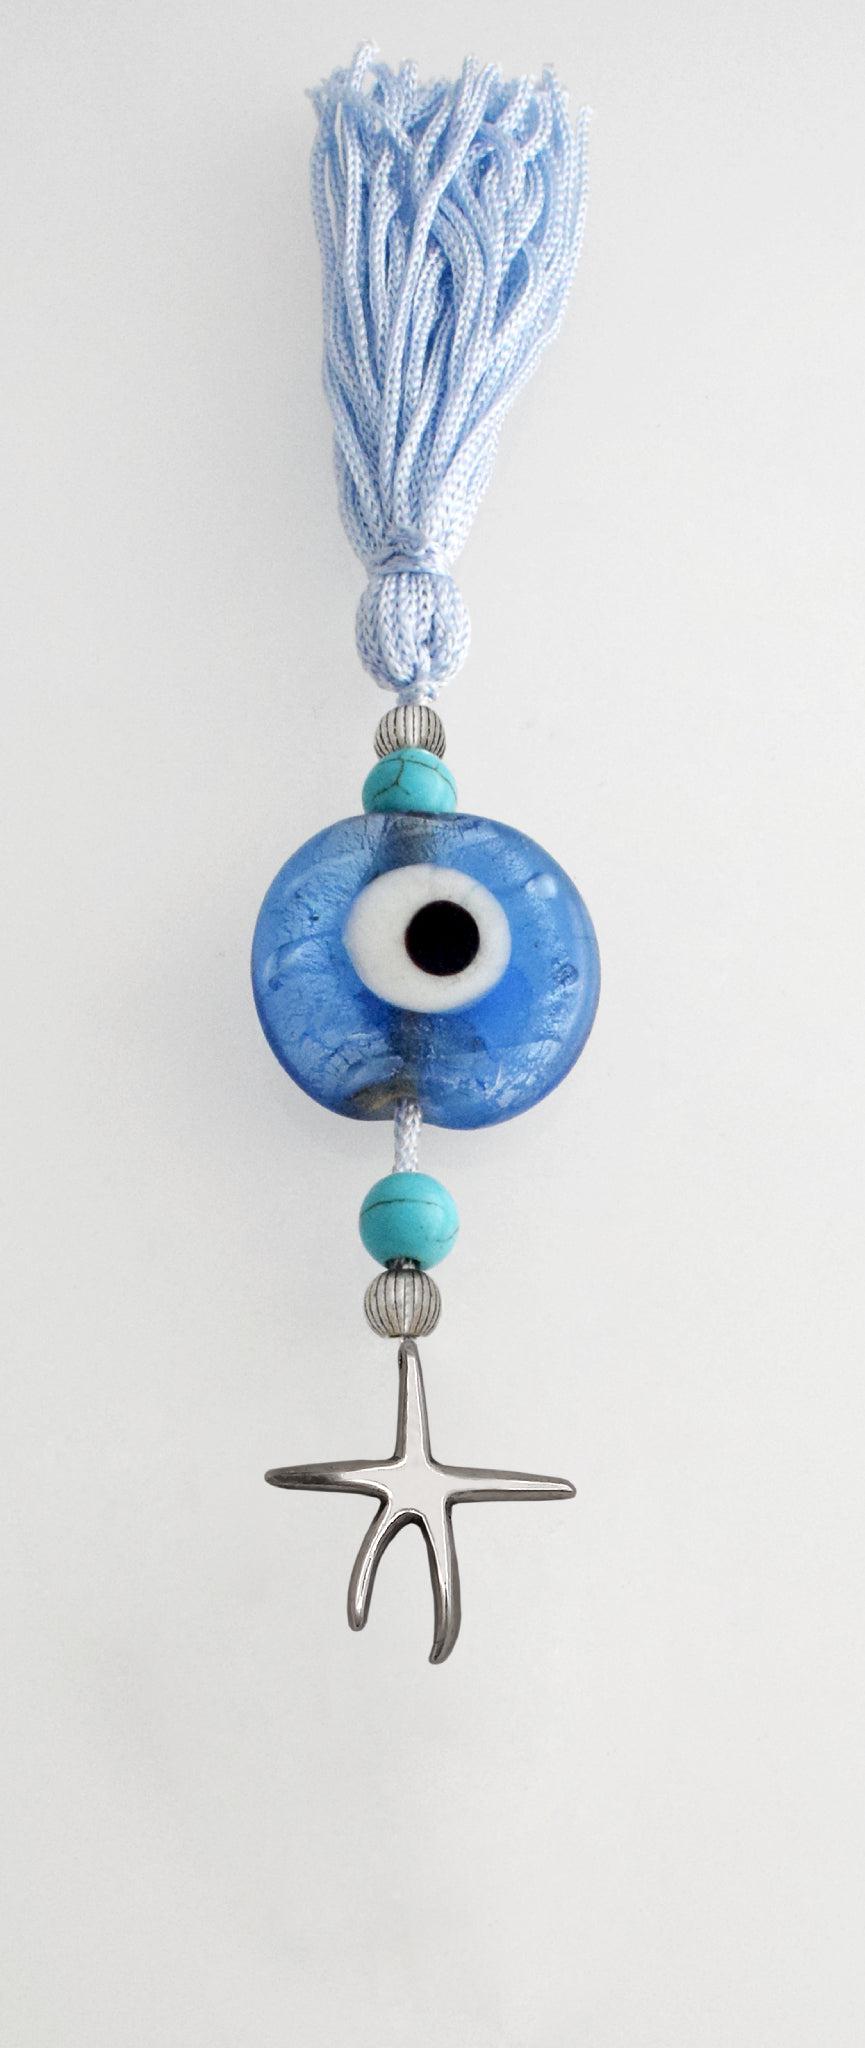 Evil Eye Charm on a tassel, House decoration, holiday decor, welcome gift, silver charm, Star Charm